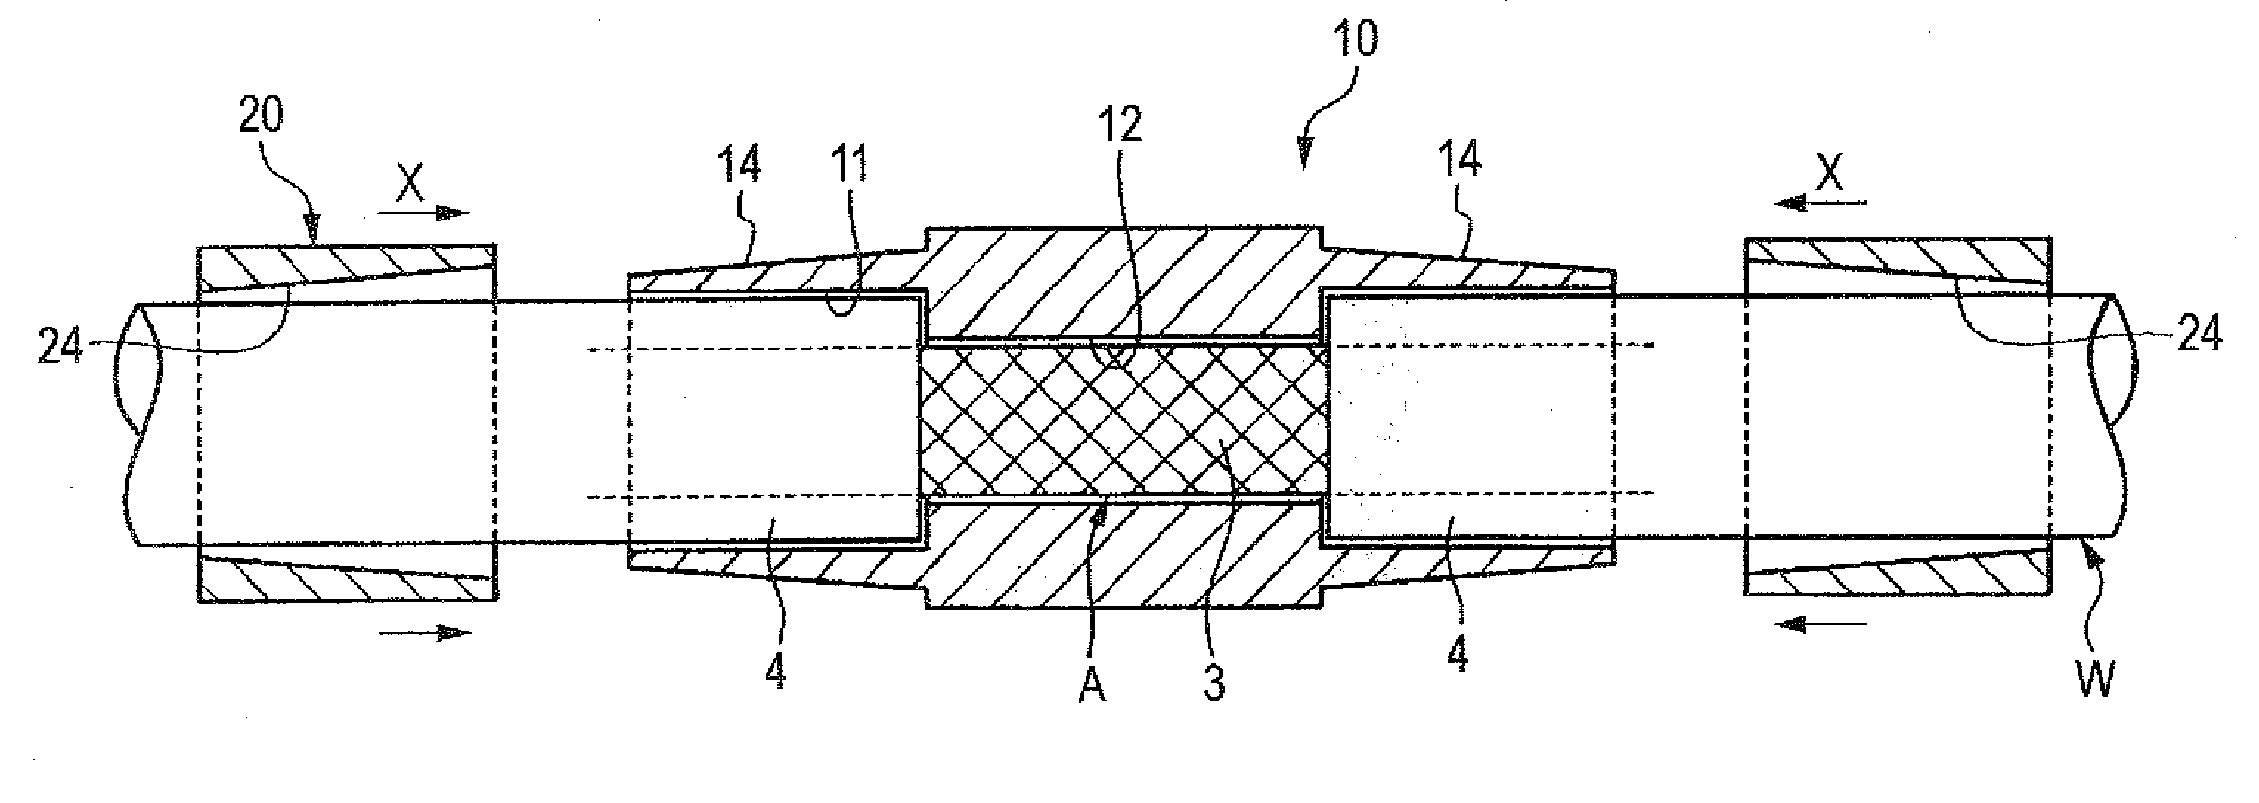 Water Stopping Structure and Water Stopping Method